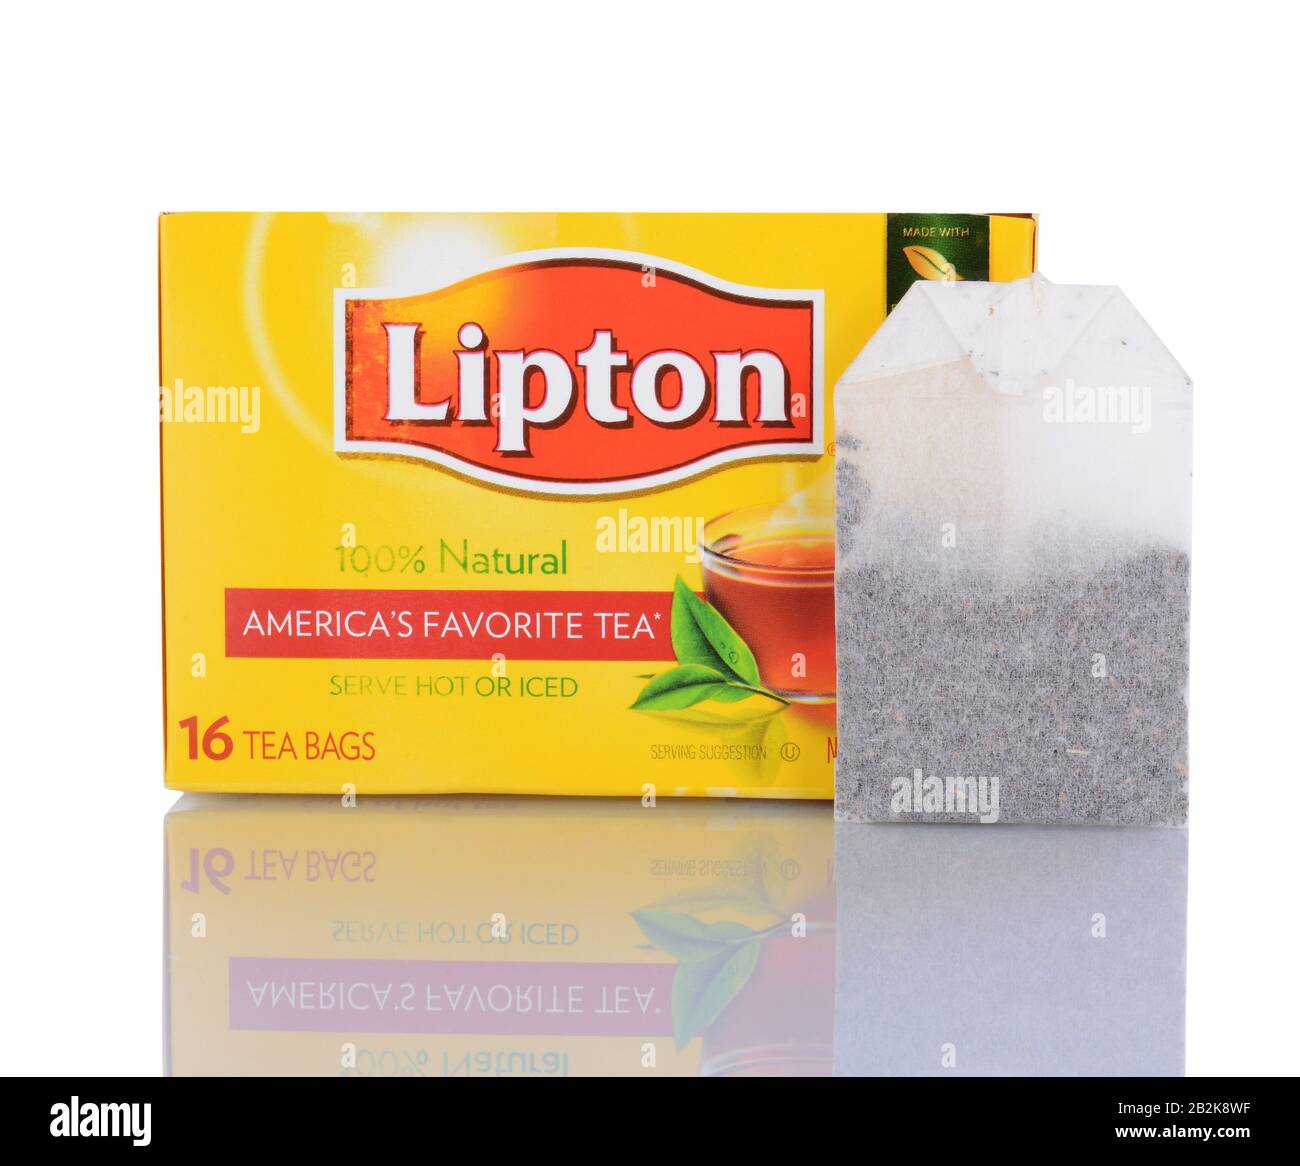 IRVINE, CA - January 29, 2014: A 16 count box of Lipton Tea Bags. Tea is the 2nd most popular drink in the world, only behind water. Stock Photo